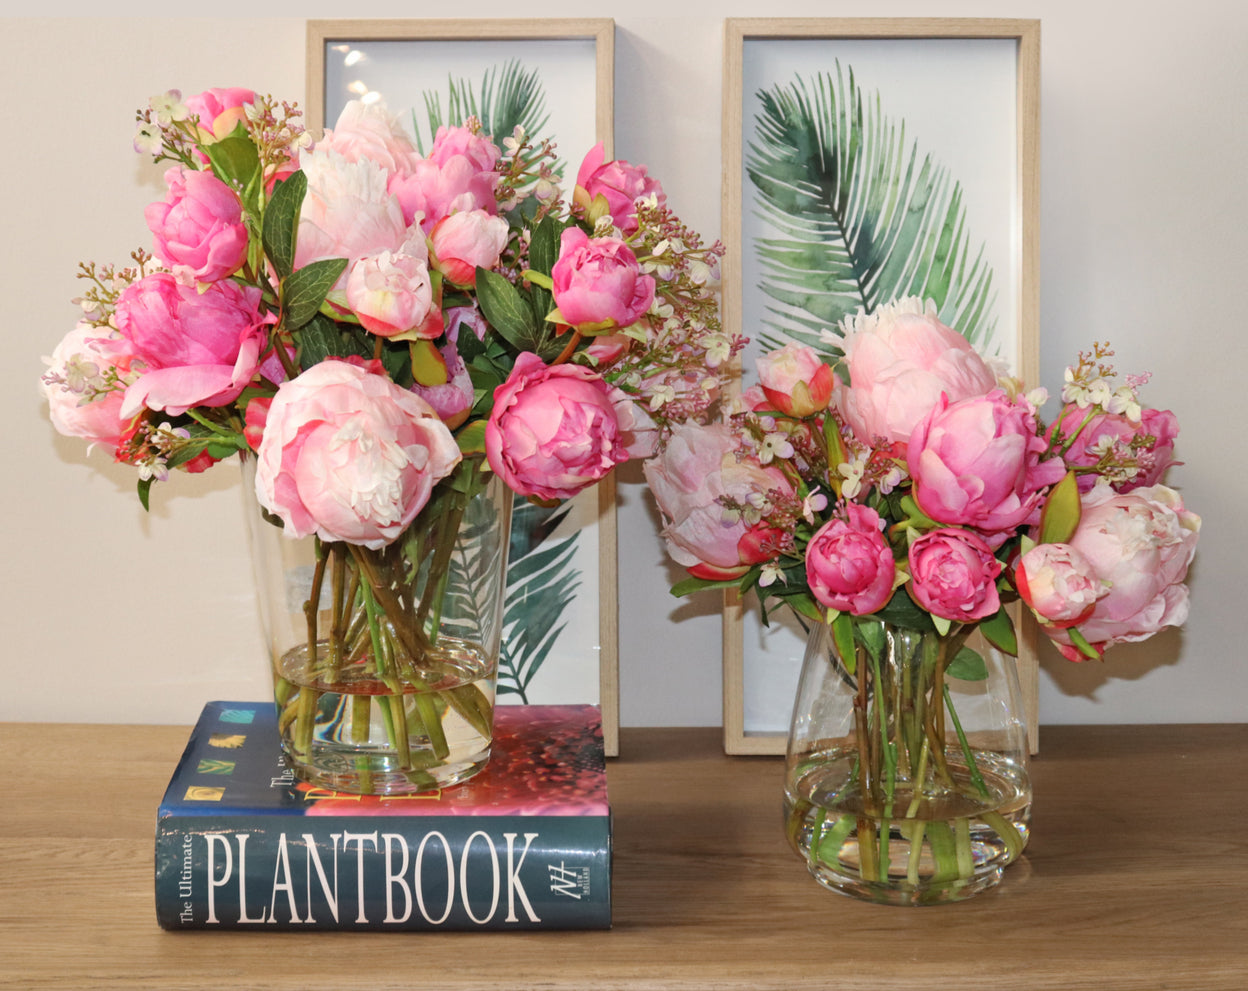 Faux pink peony arrangements positioned together on a table